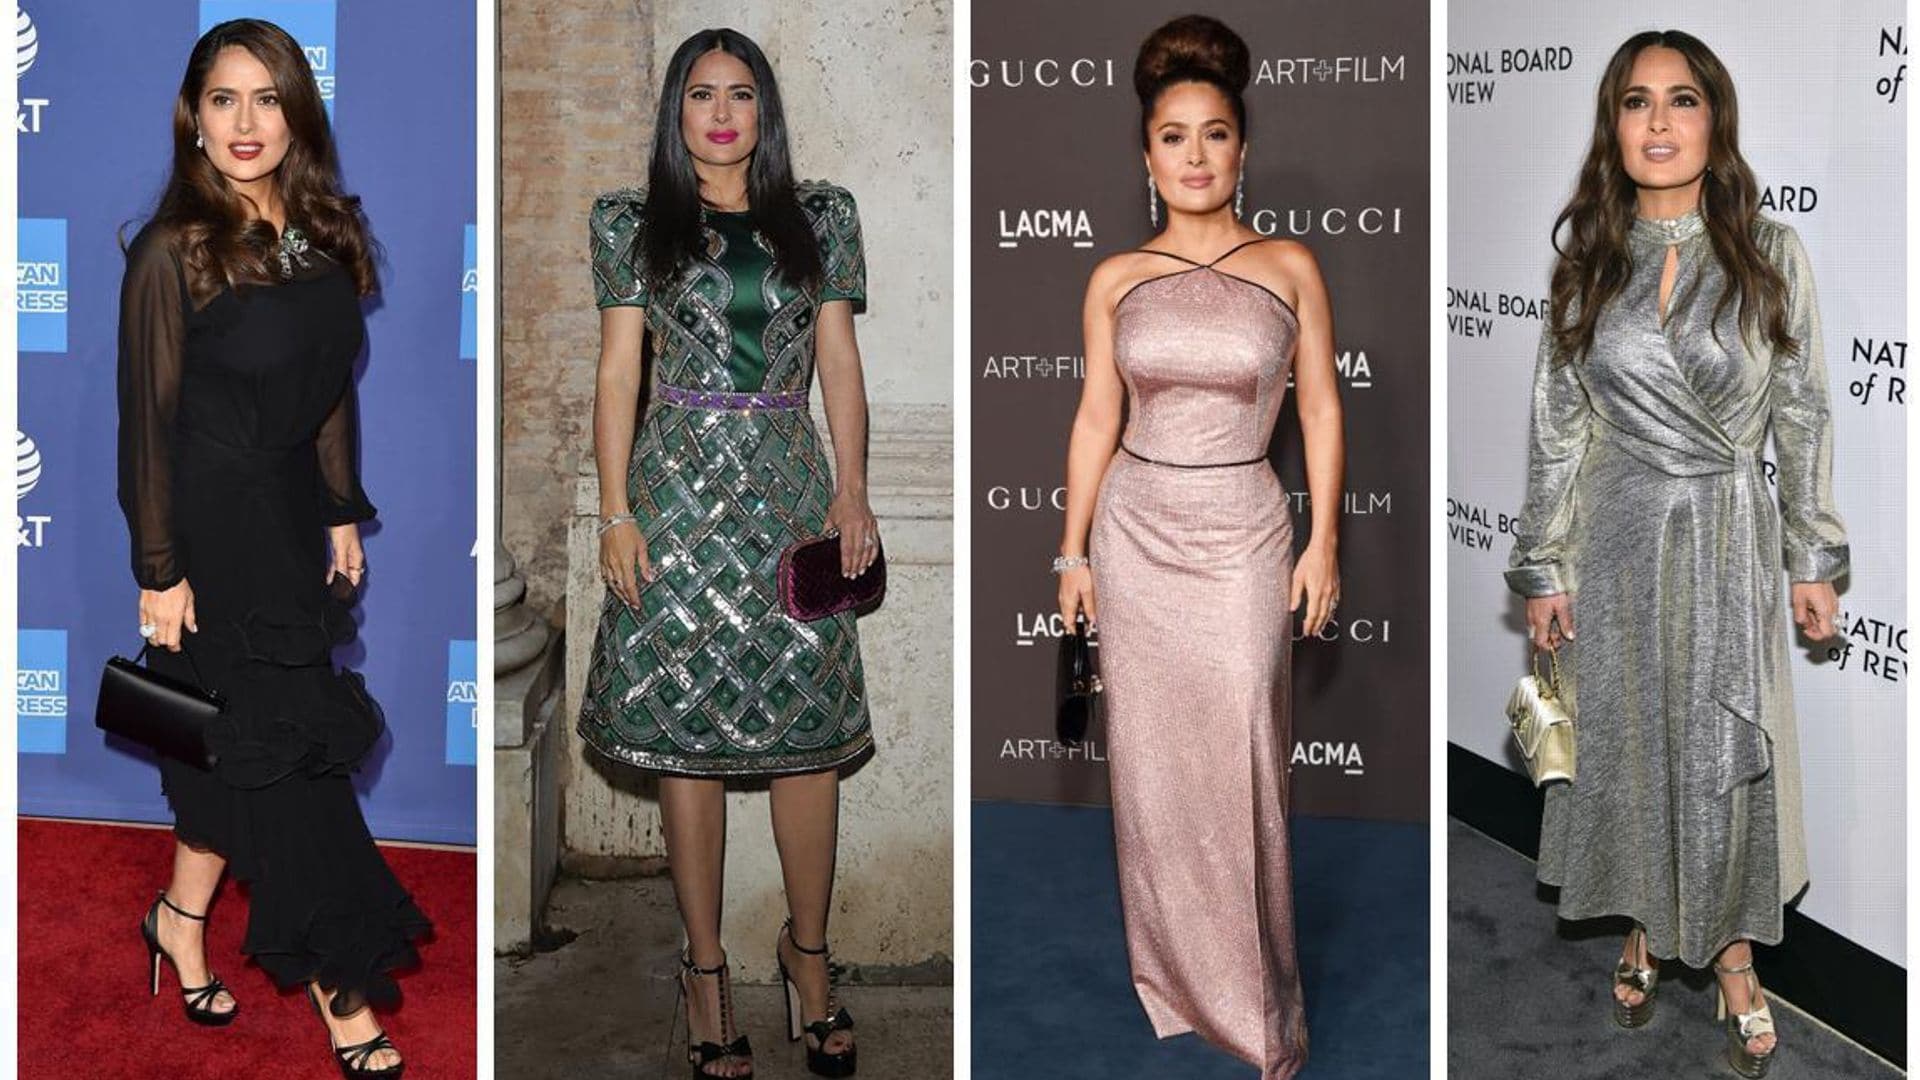 Salma Hayek demonstrates that necklines and shine are on your side when it comes to elongating your figure